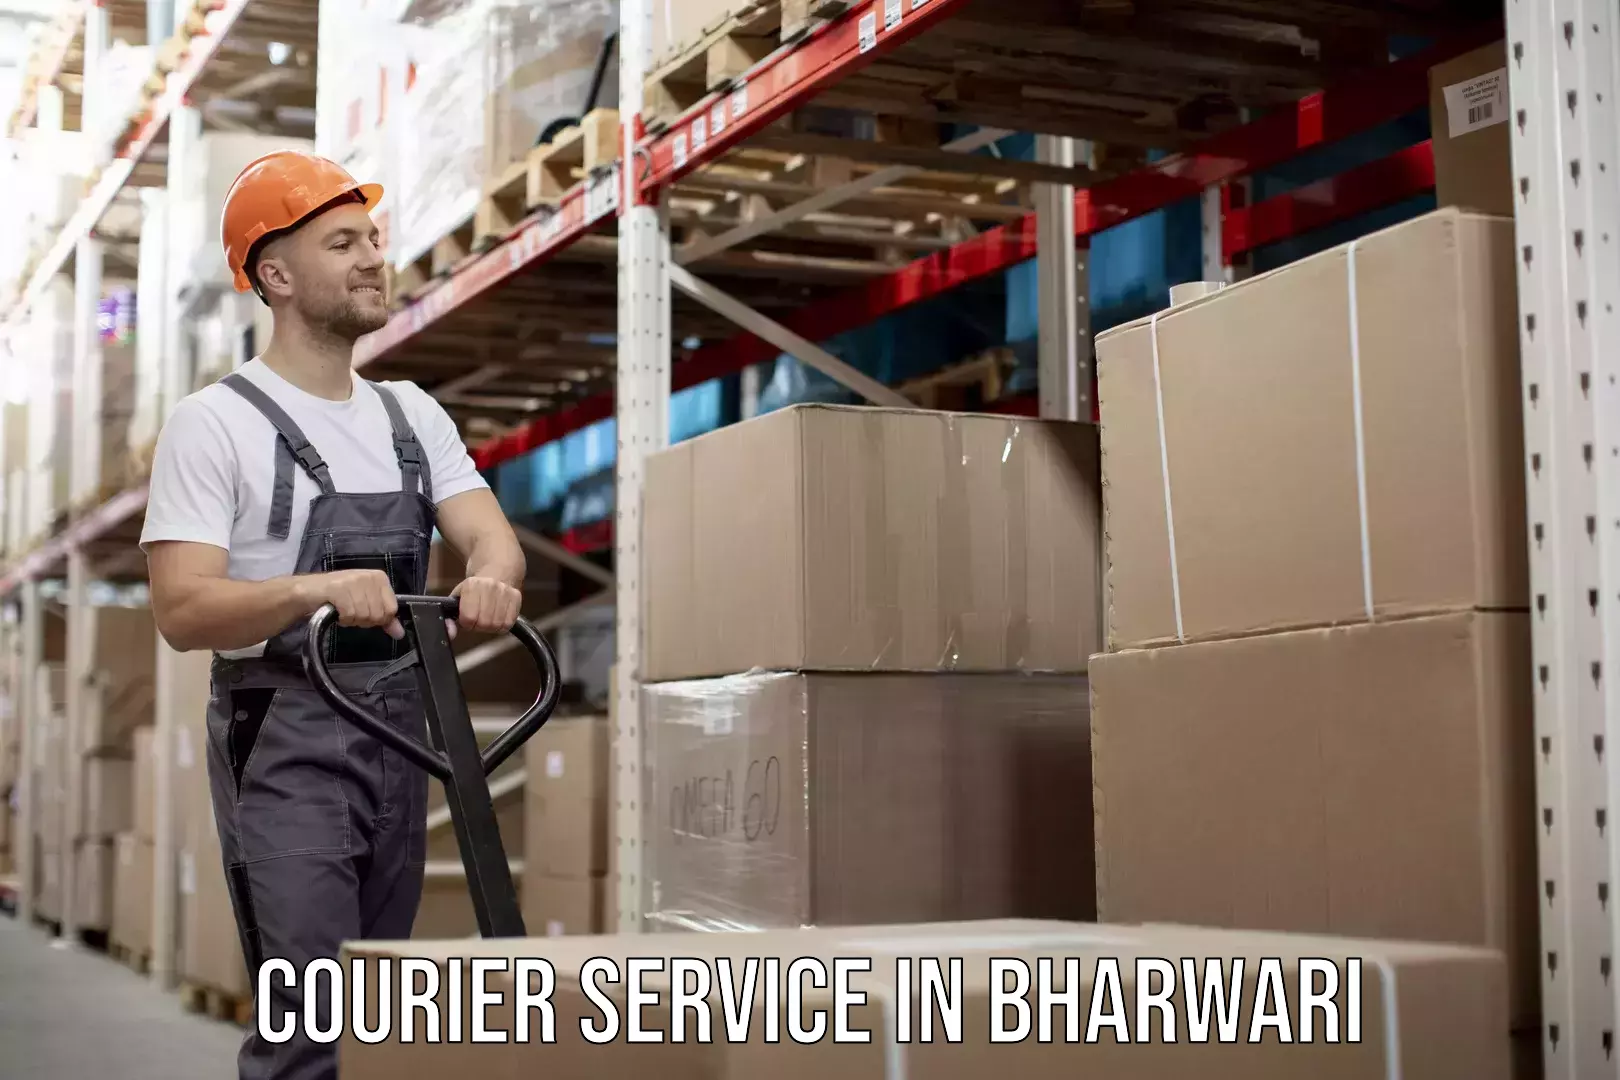 User-friendly delivery service in Bharwari